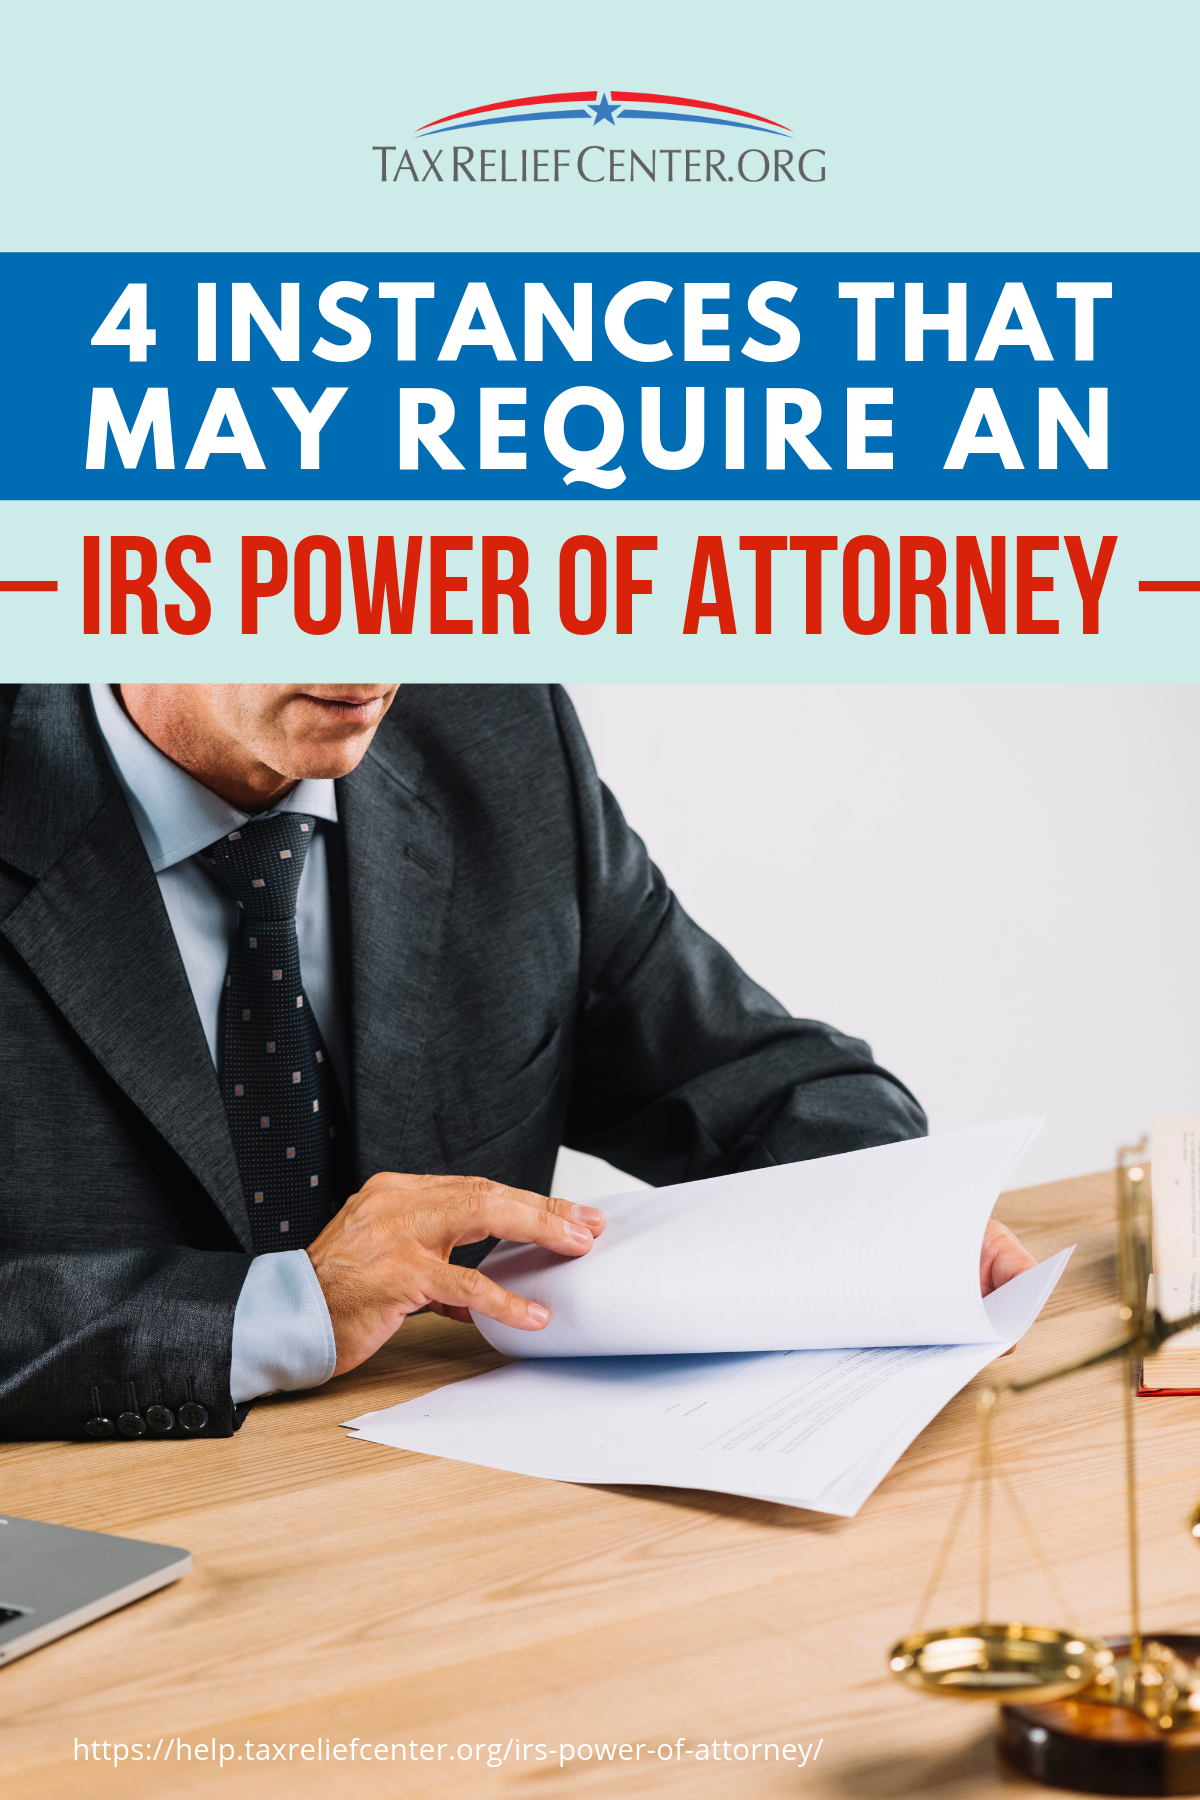 4 Instances That May Require An IRS Power Of Attorney https://help.taxreliefcenter.org/irs-power-of-attorney/